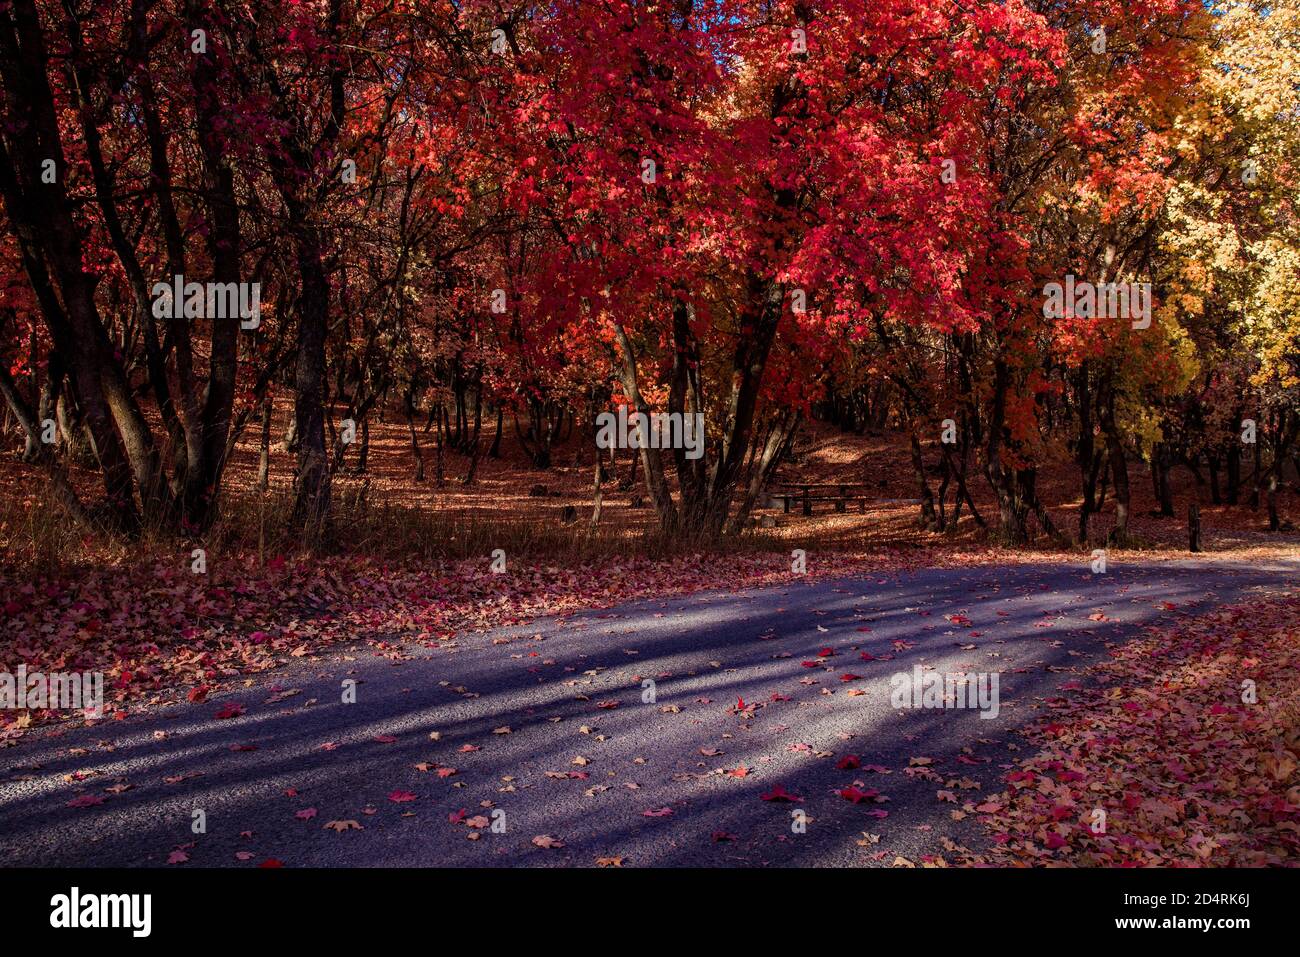 A narrow mountain road through a forest of red maple trees. Stock Photo